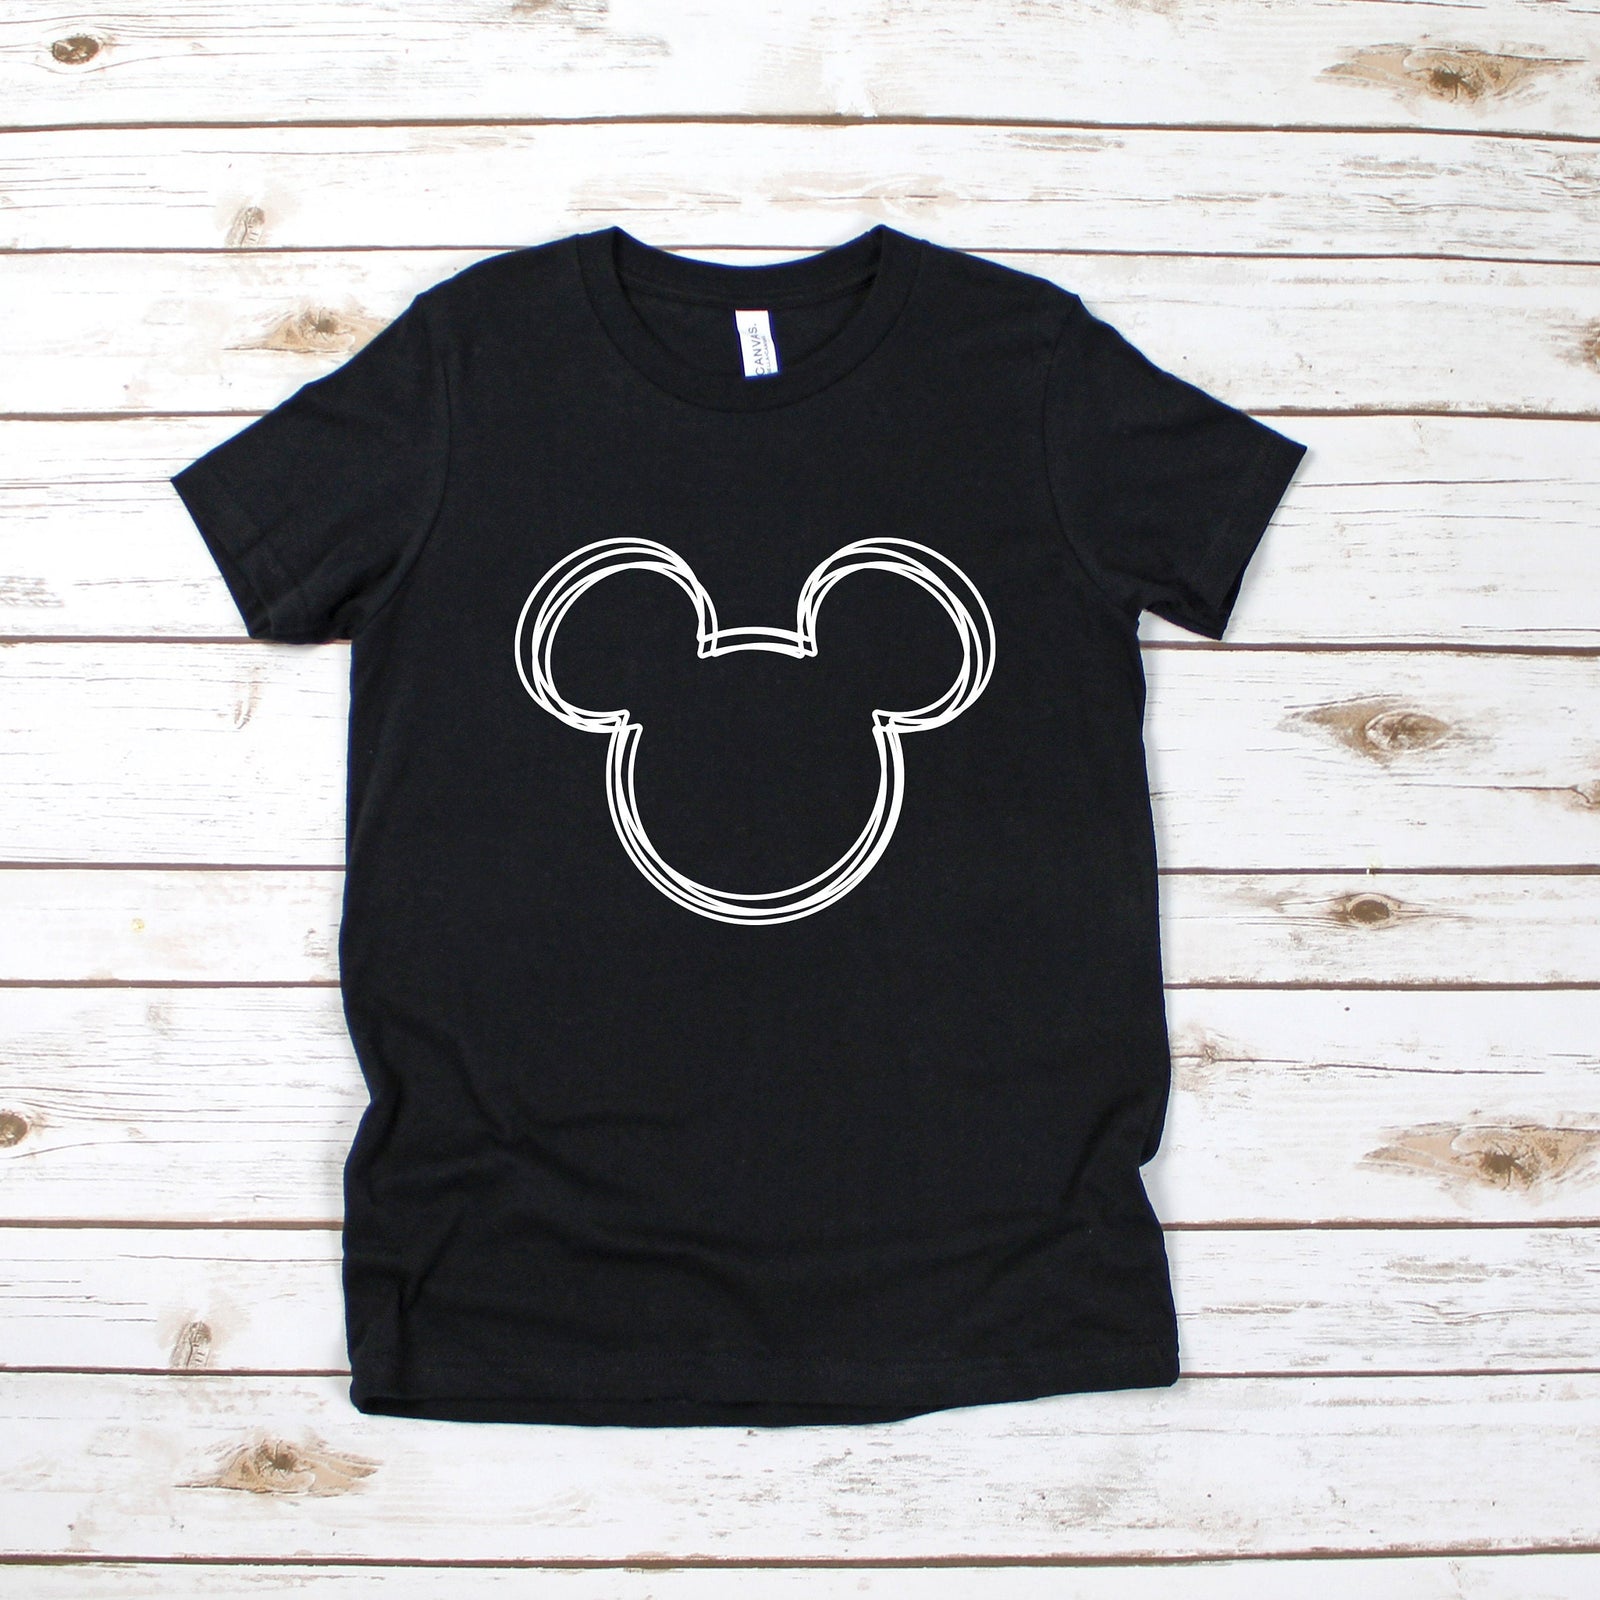 Scribble Mickey Mouse Shirt - Disney Youth kids T shirt - Personalized Disney Shirts